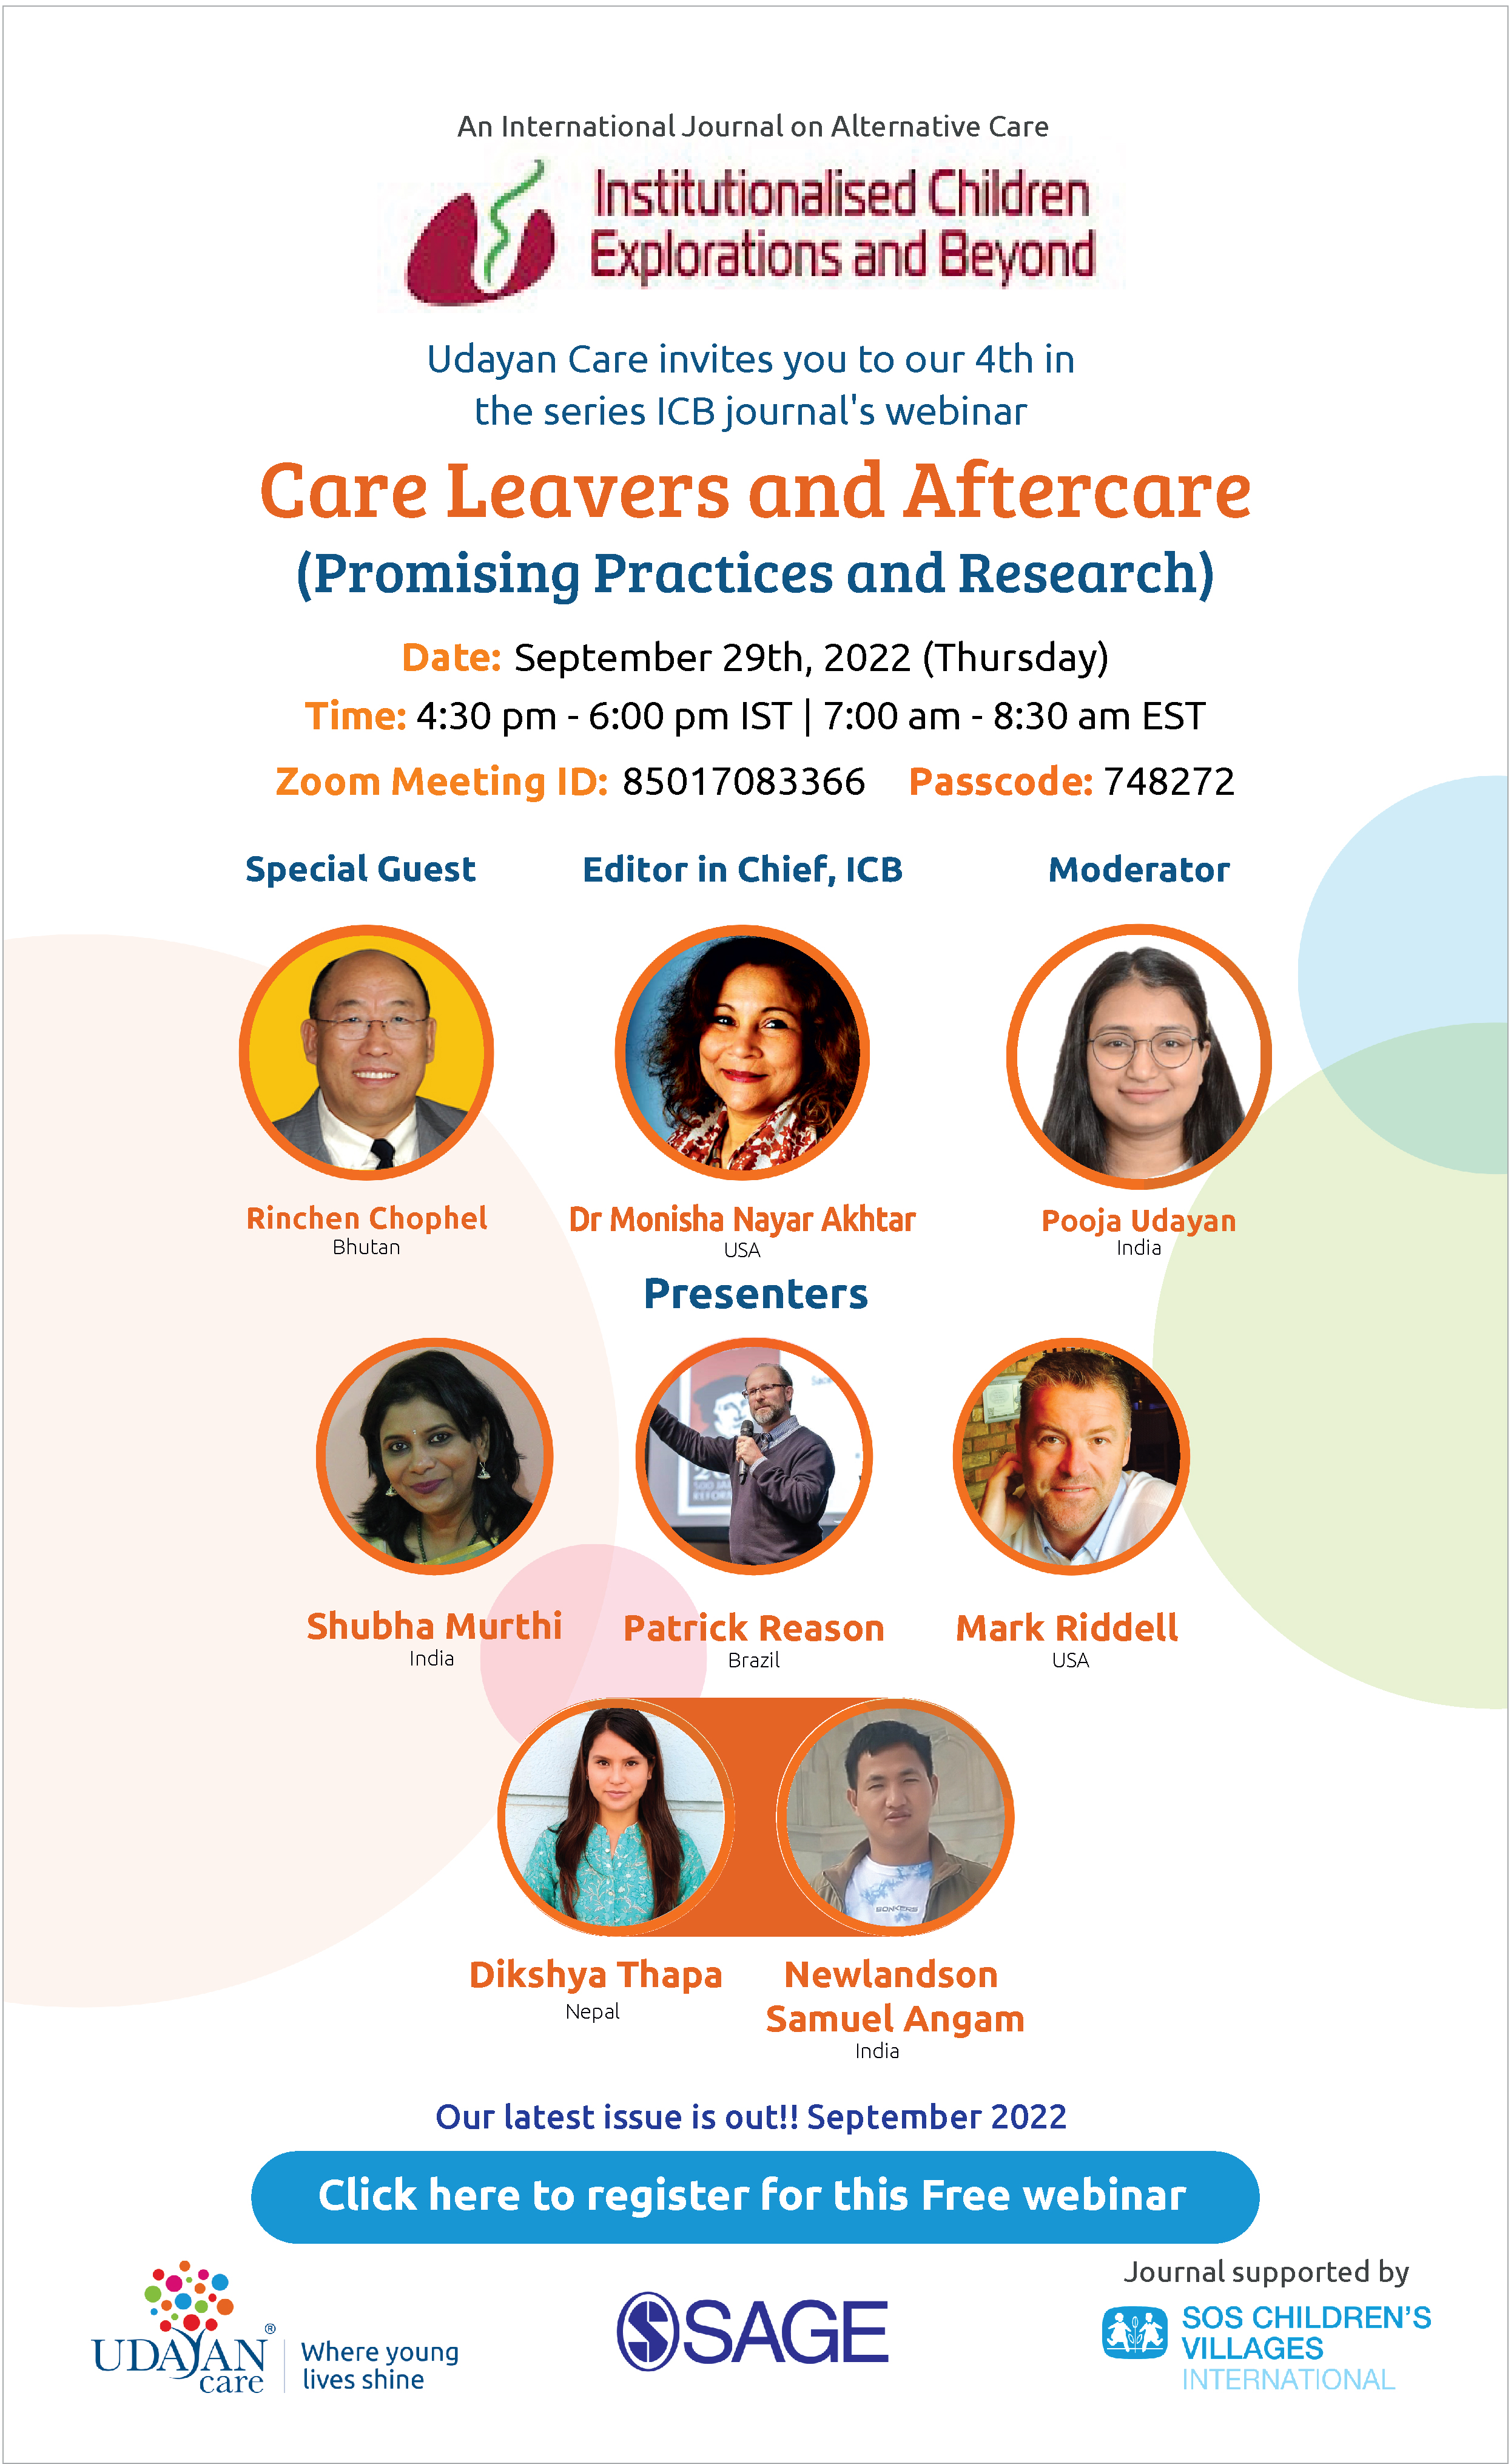 Udayan Care invites you to their 4th in the series ICB's journal webinar.